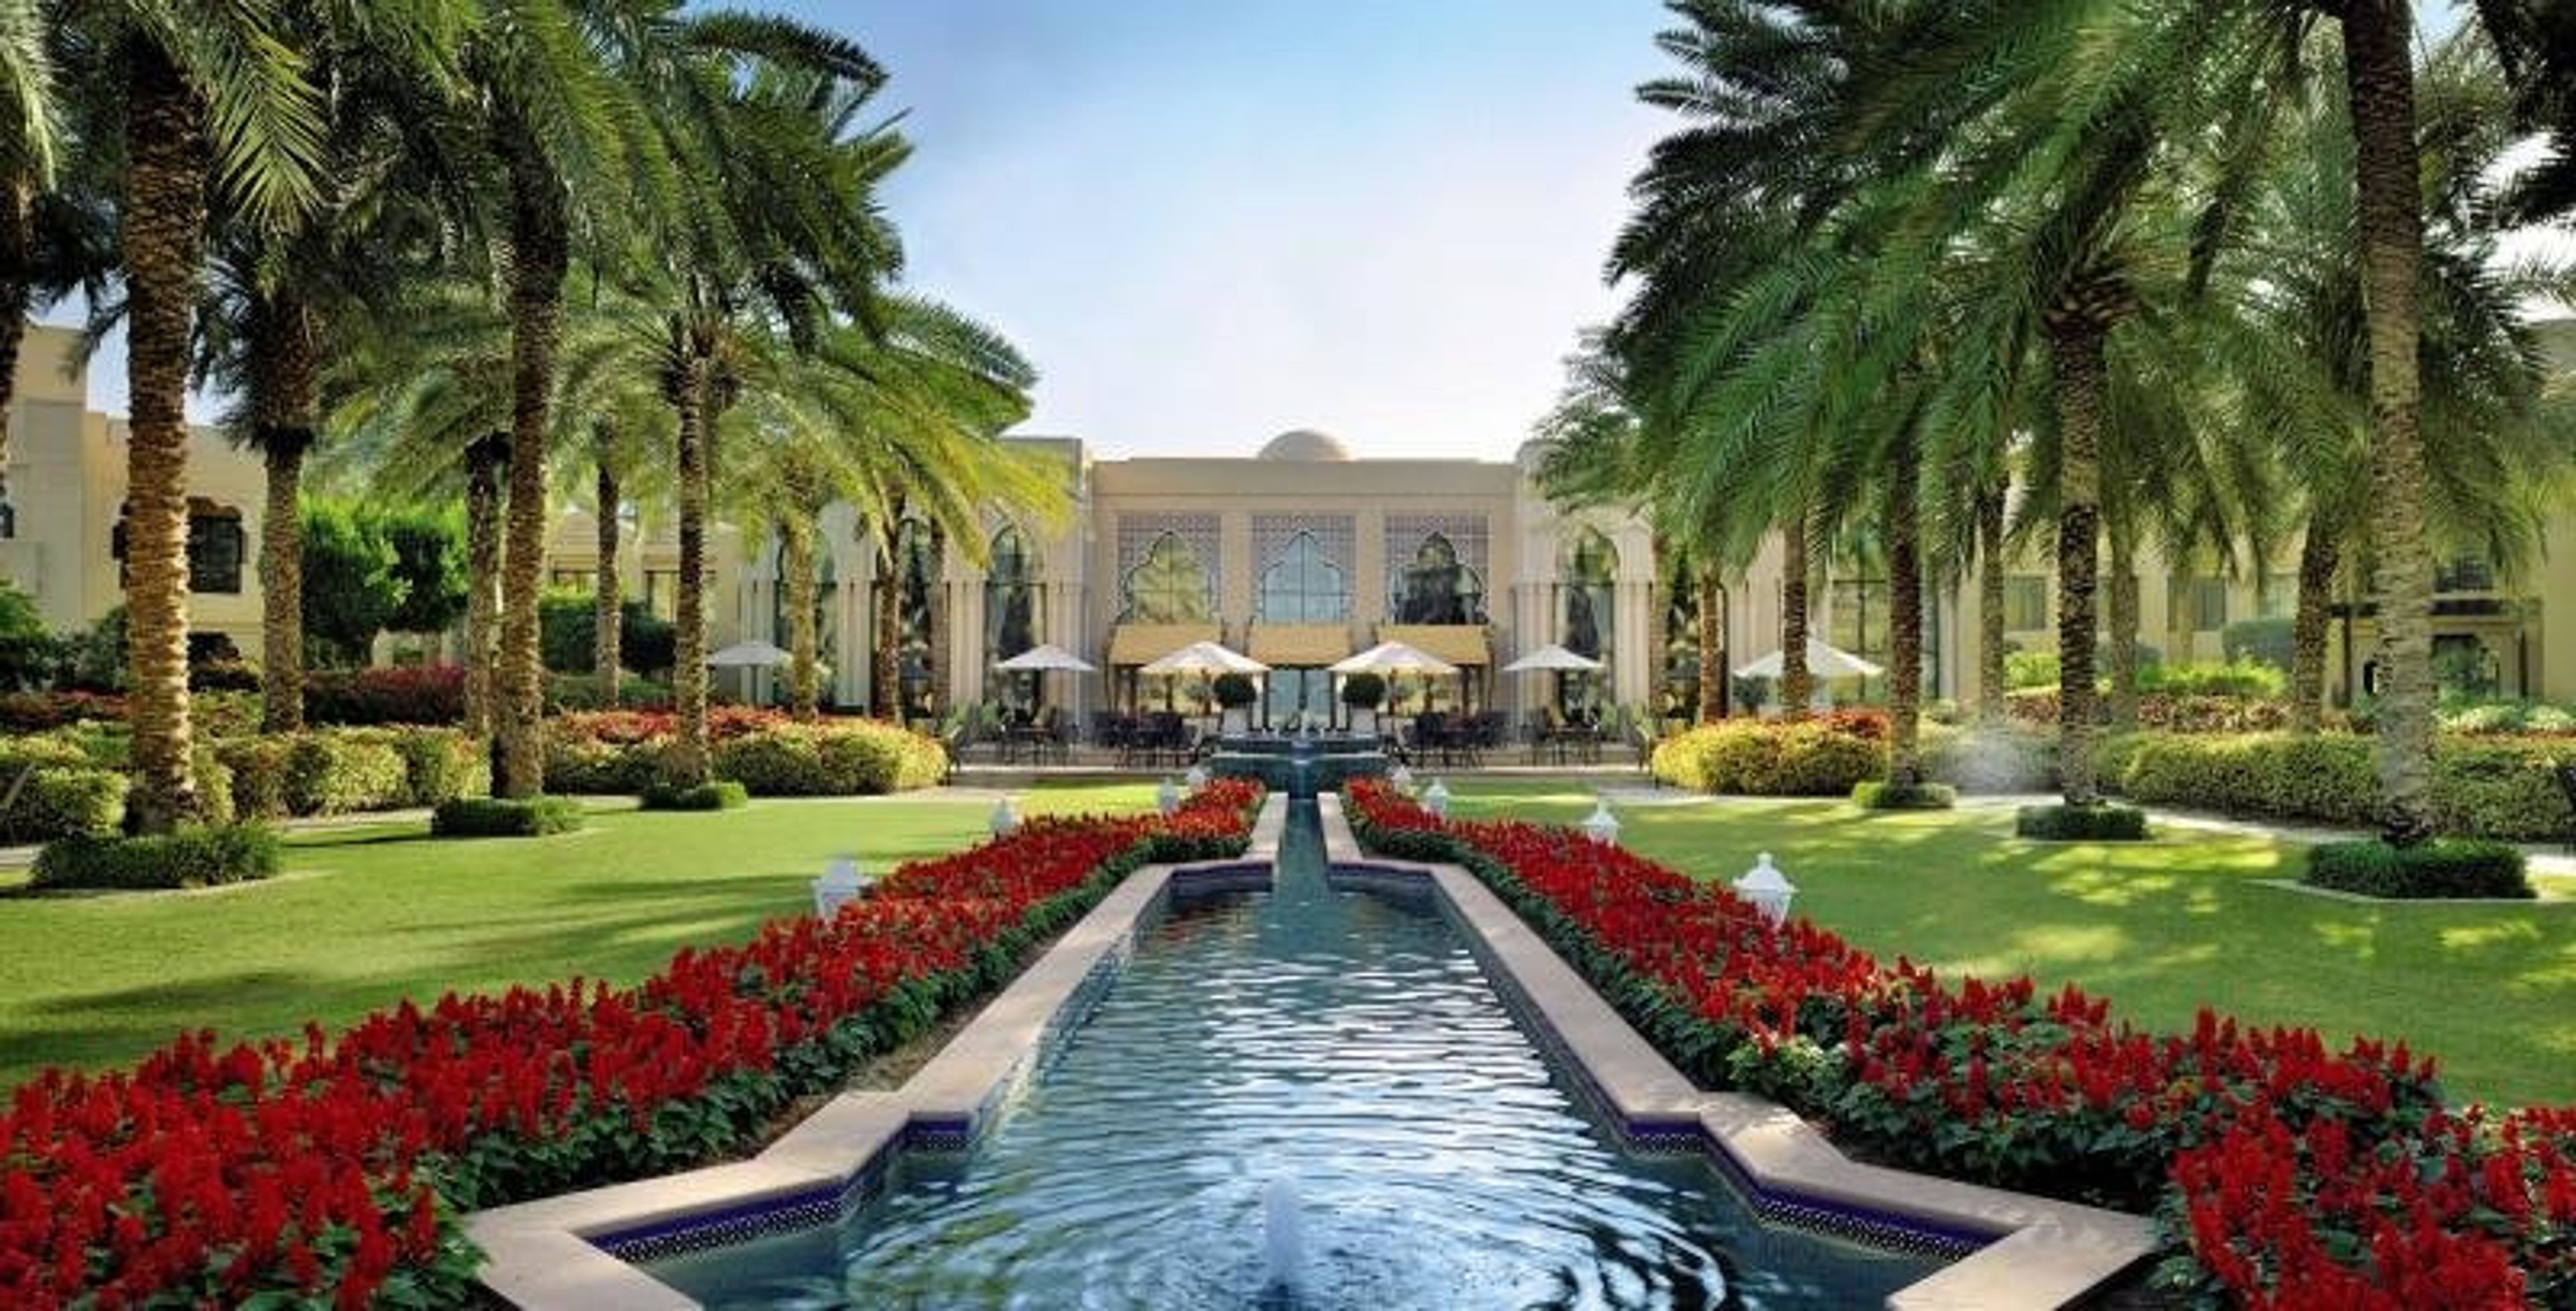 Residence en Spa at One and Only Royal Mirage